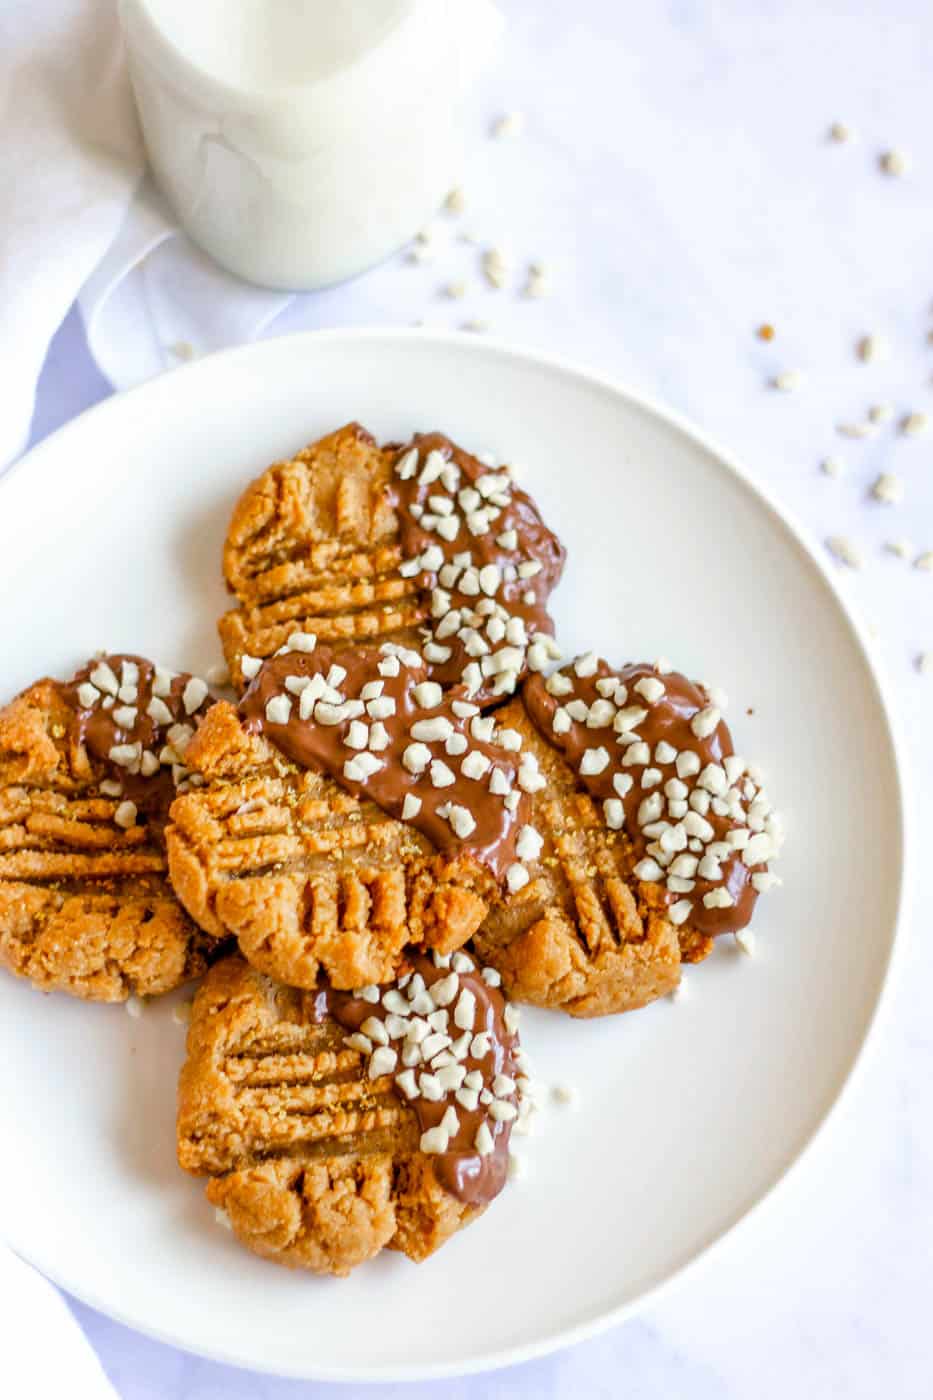 Almond Flour Peanut Butter Cookies dipped in chocolate and nuts, on white plate.